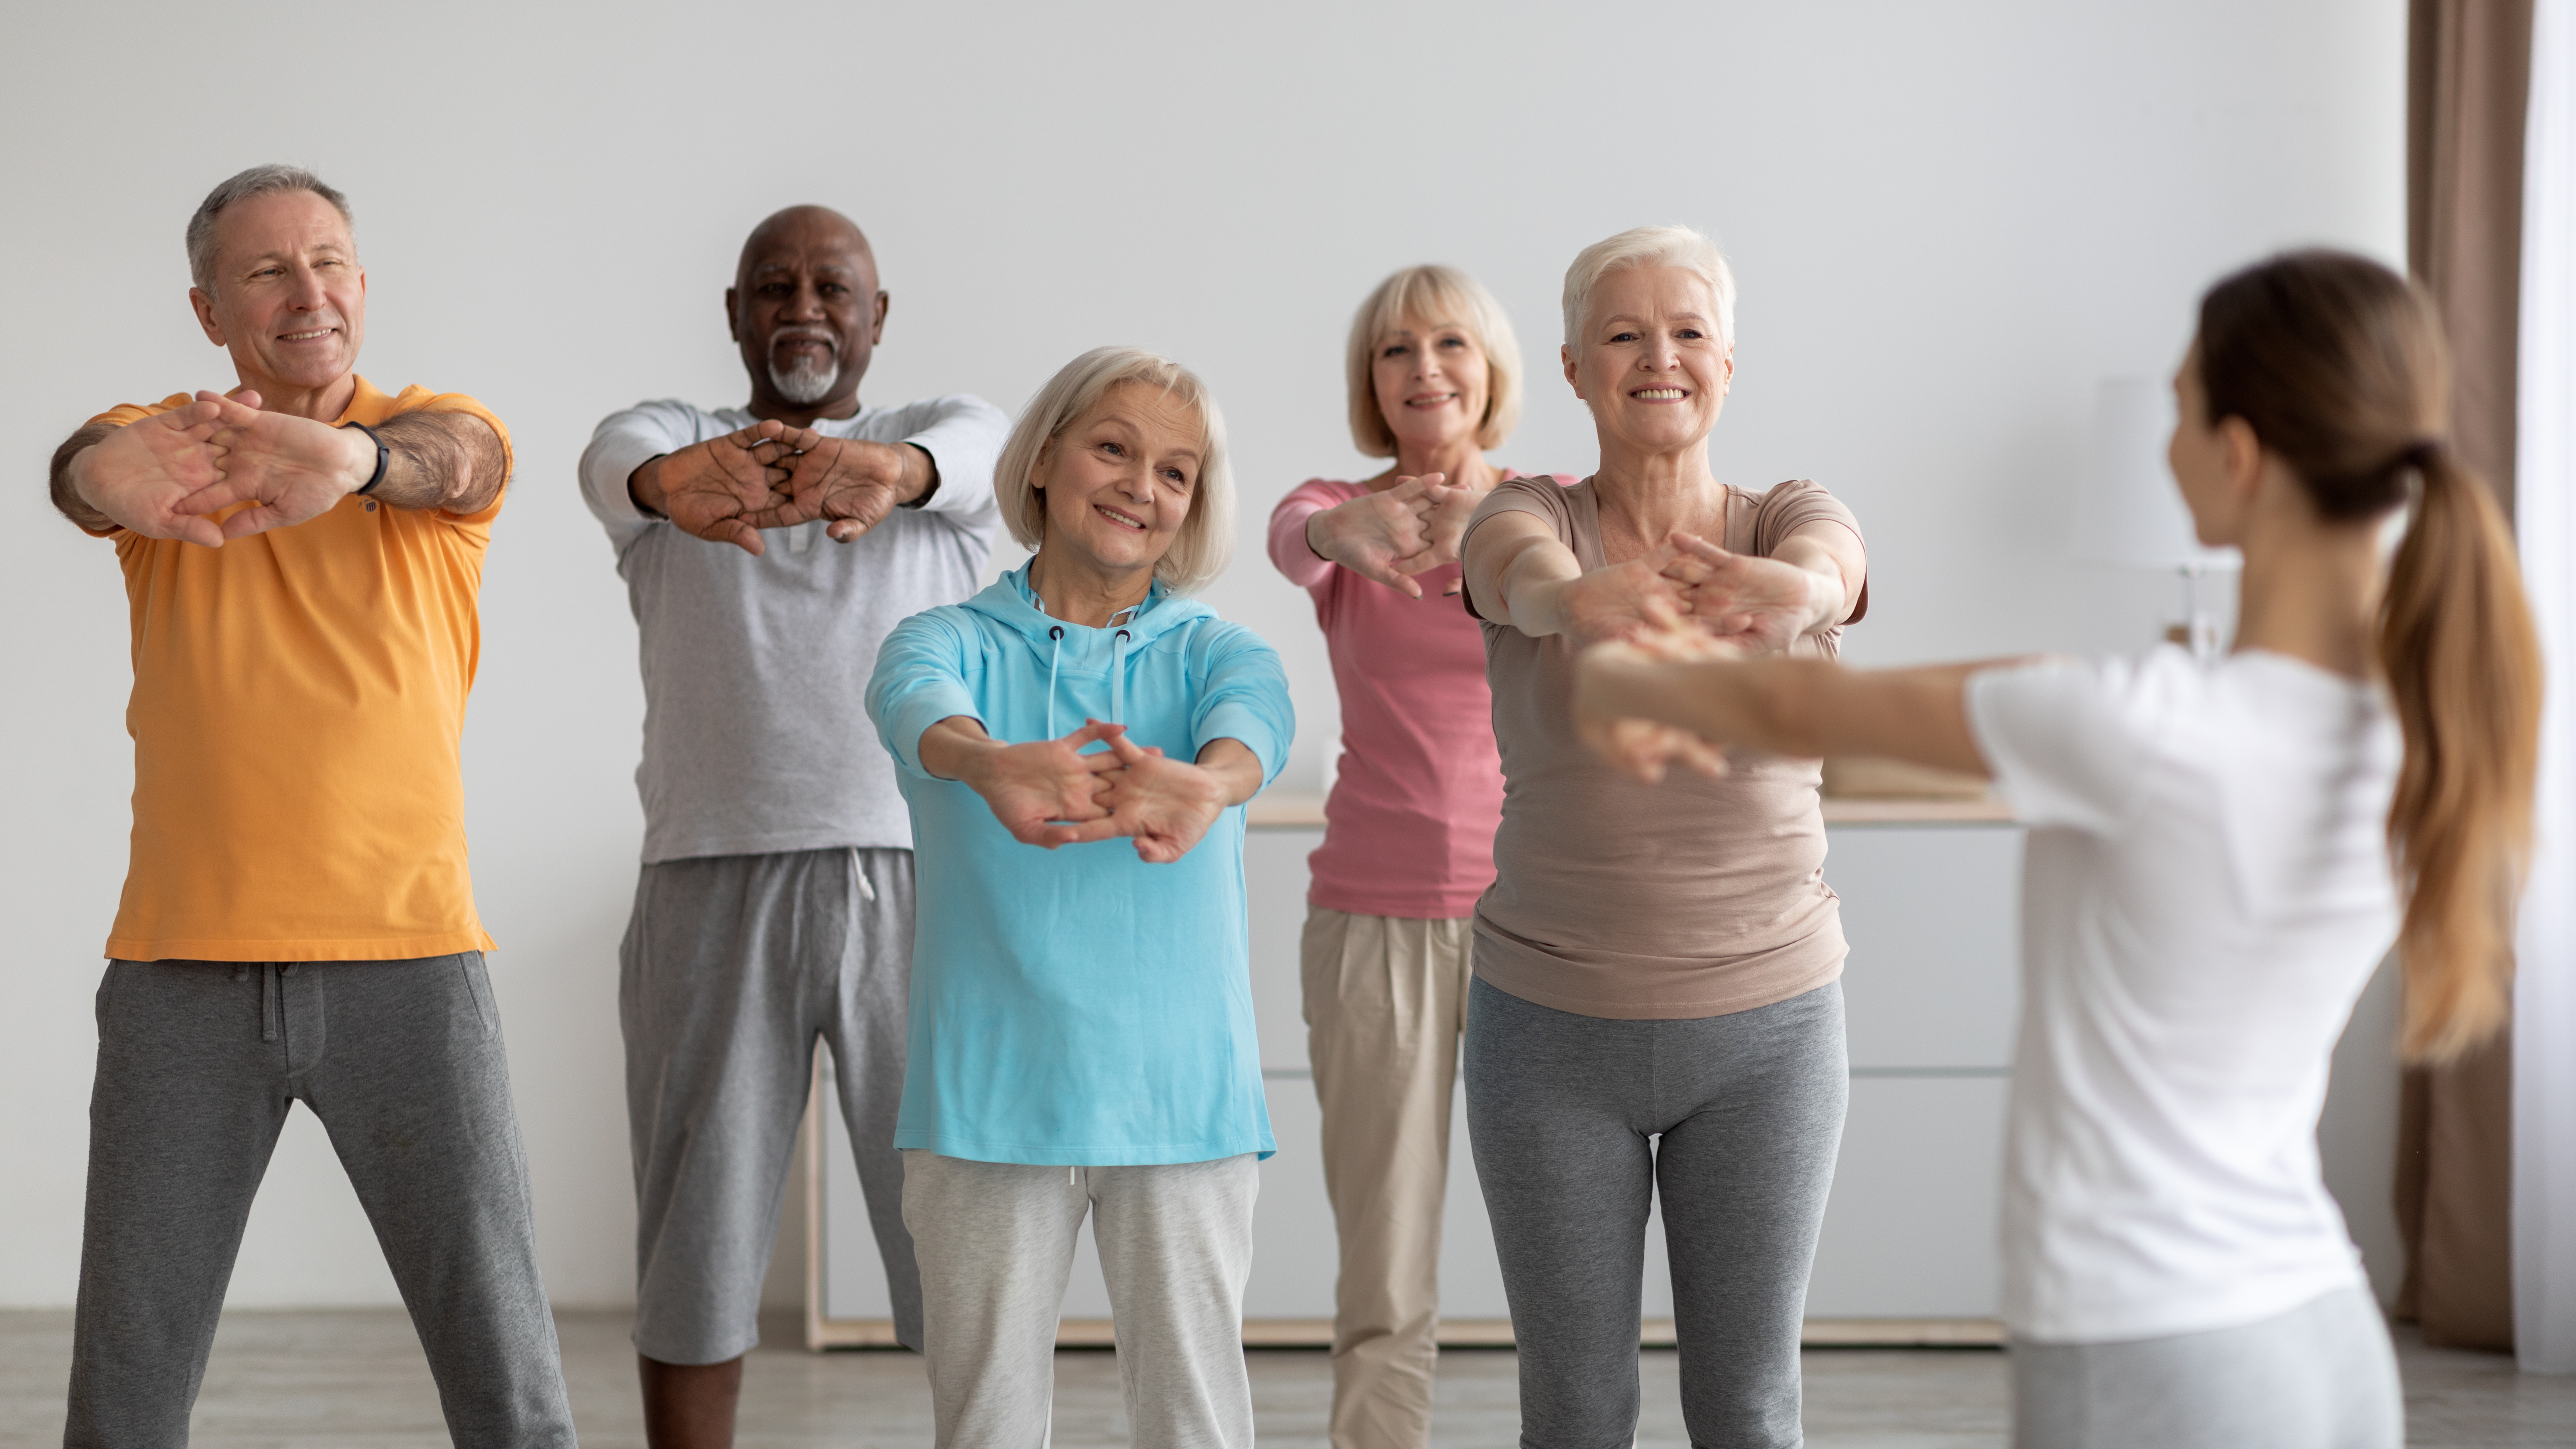 Keep Fit & Exercise Classes for Seniors in Kent